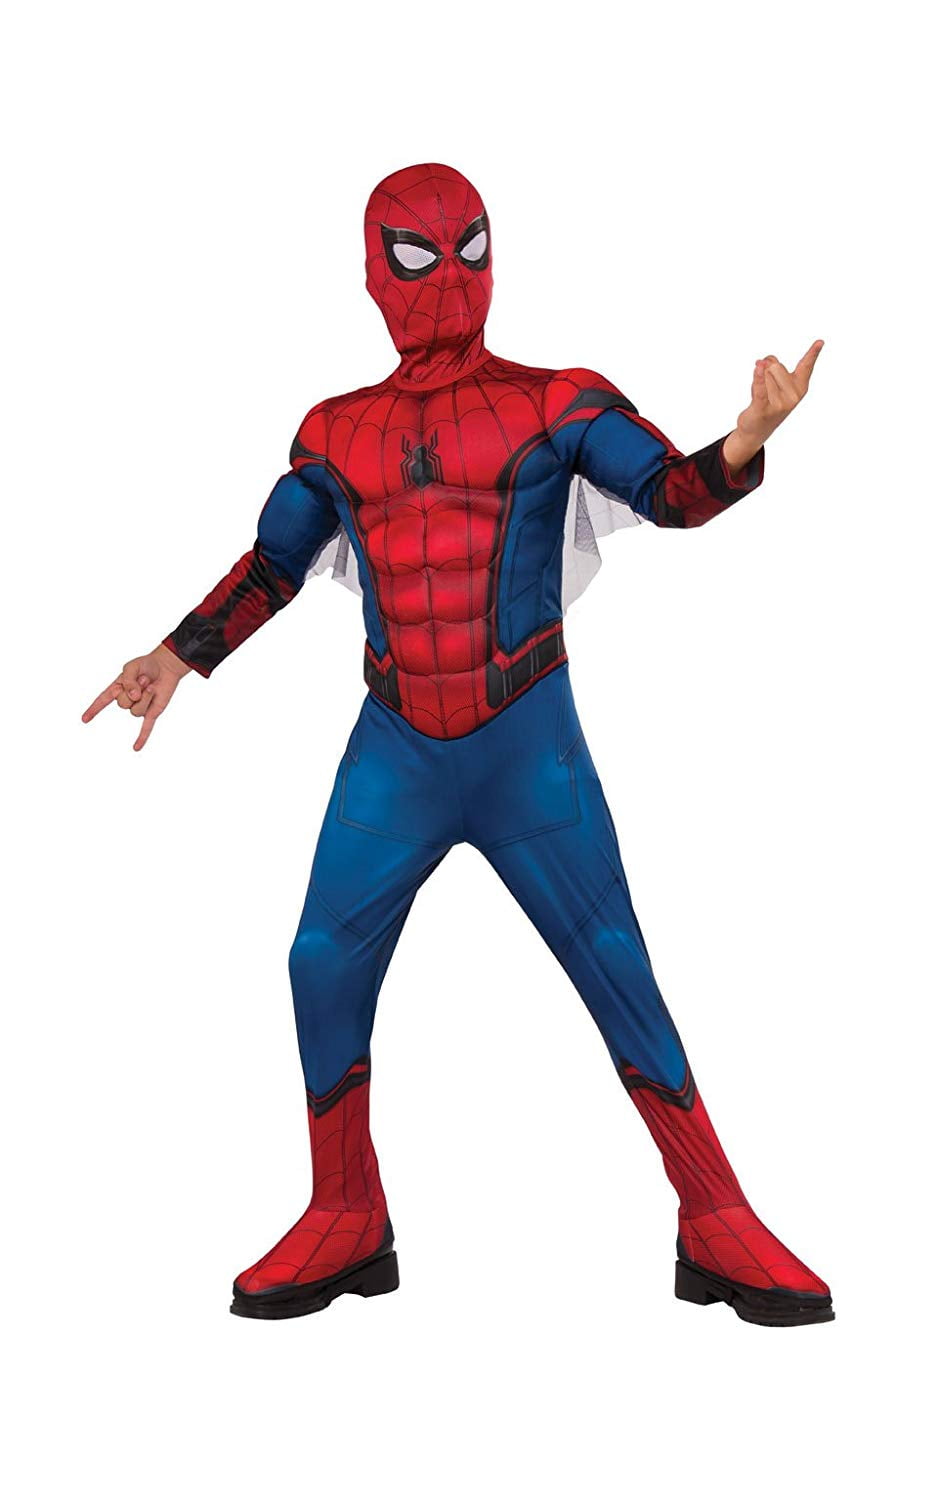 Spider-Man Muscle Deluxe Costume Disney Marvel Comics Brand New SIZE 5-6 